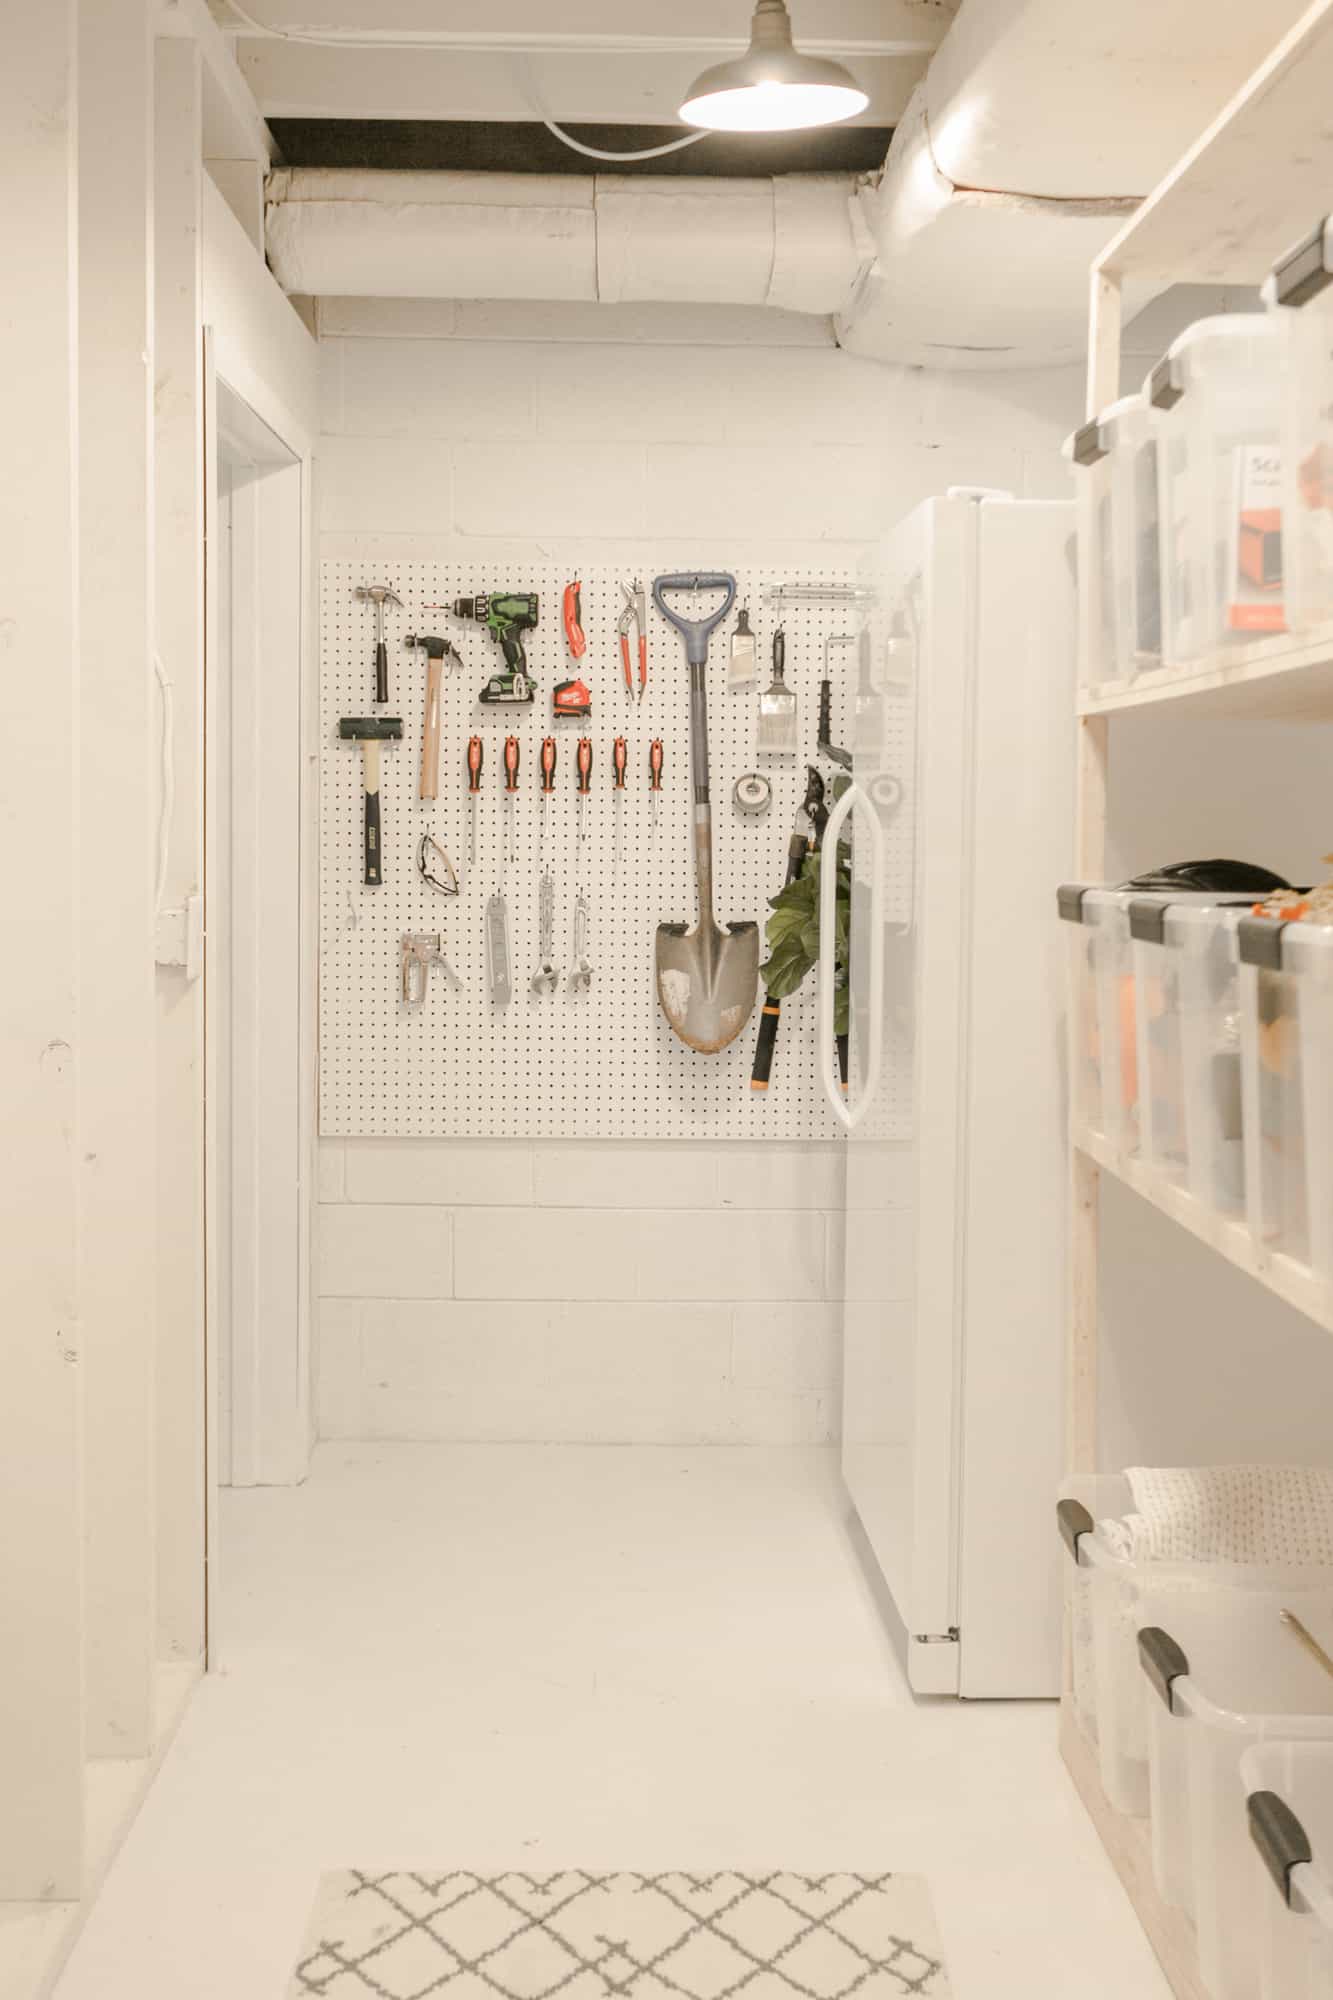 wall of the storage room with a white cork board hanging on the wall with tools hanging on it